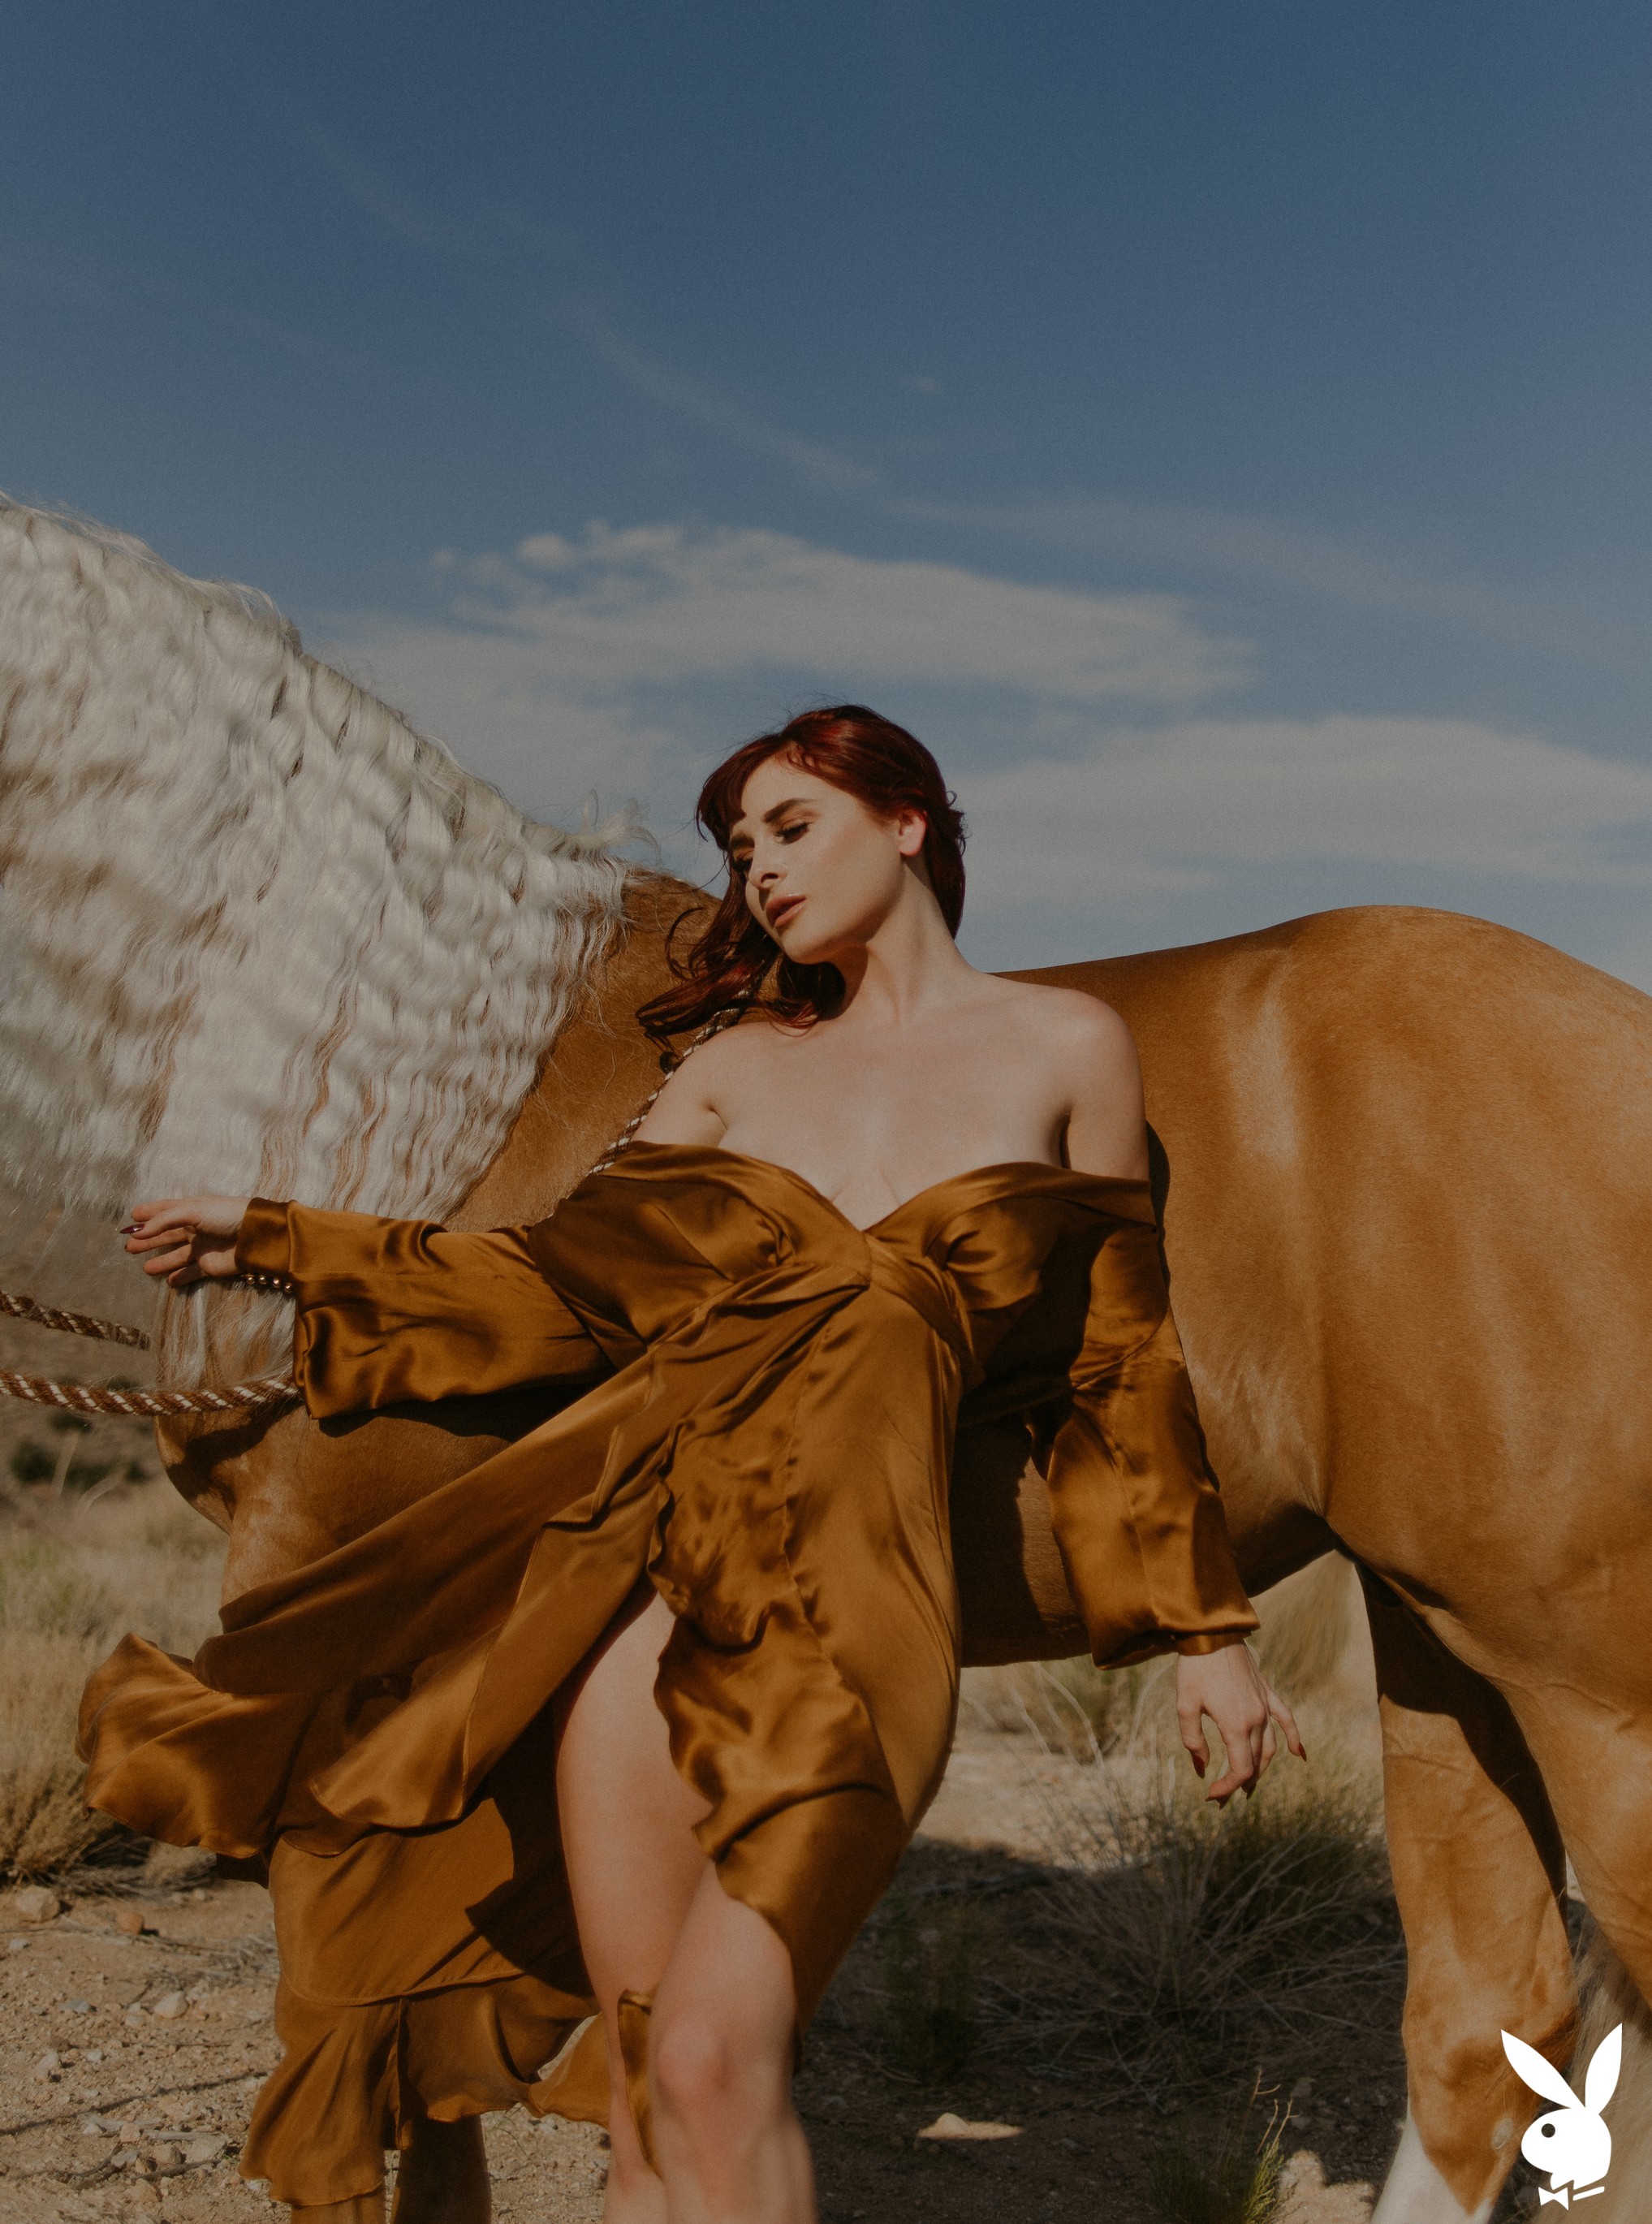 odette-call-of-the-wild-redhead-naked-desert-horse-playboy-01